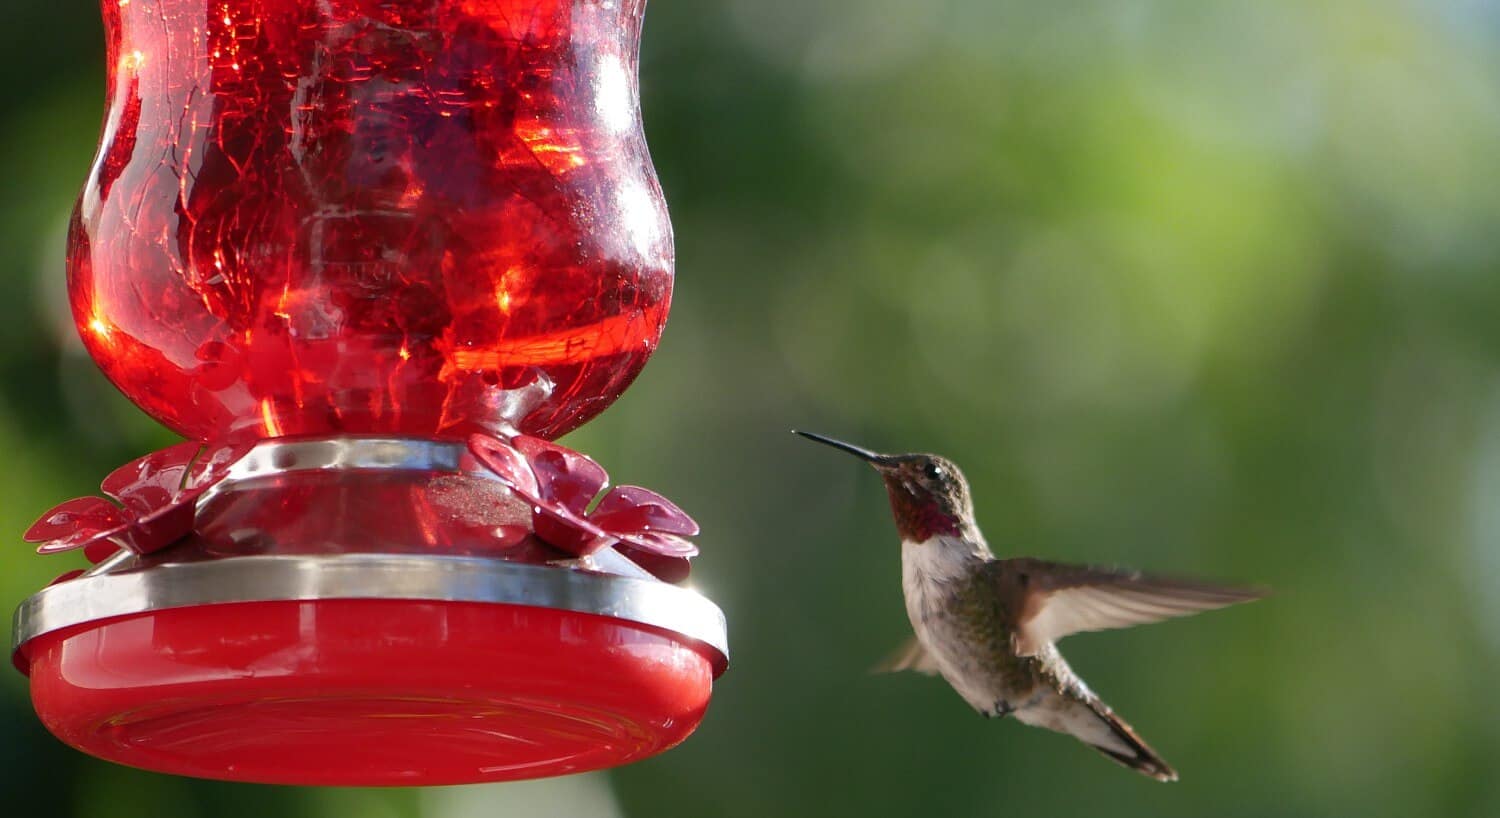 Focused view of a hummingbird mid-flight coming towards a red hanging bird feeder